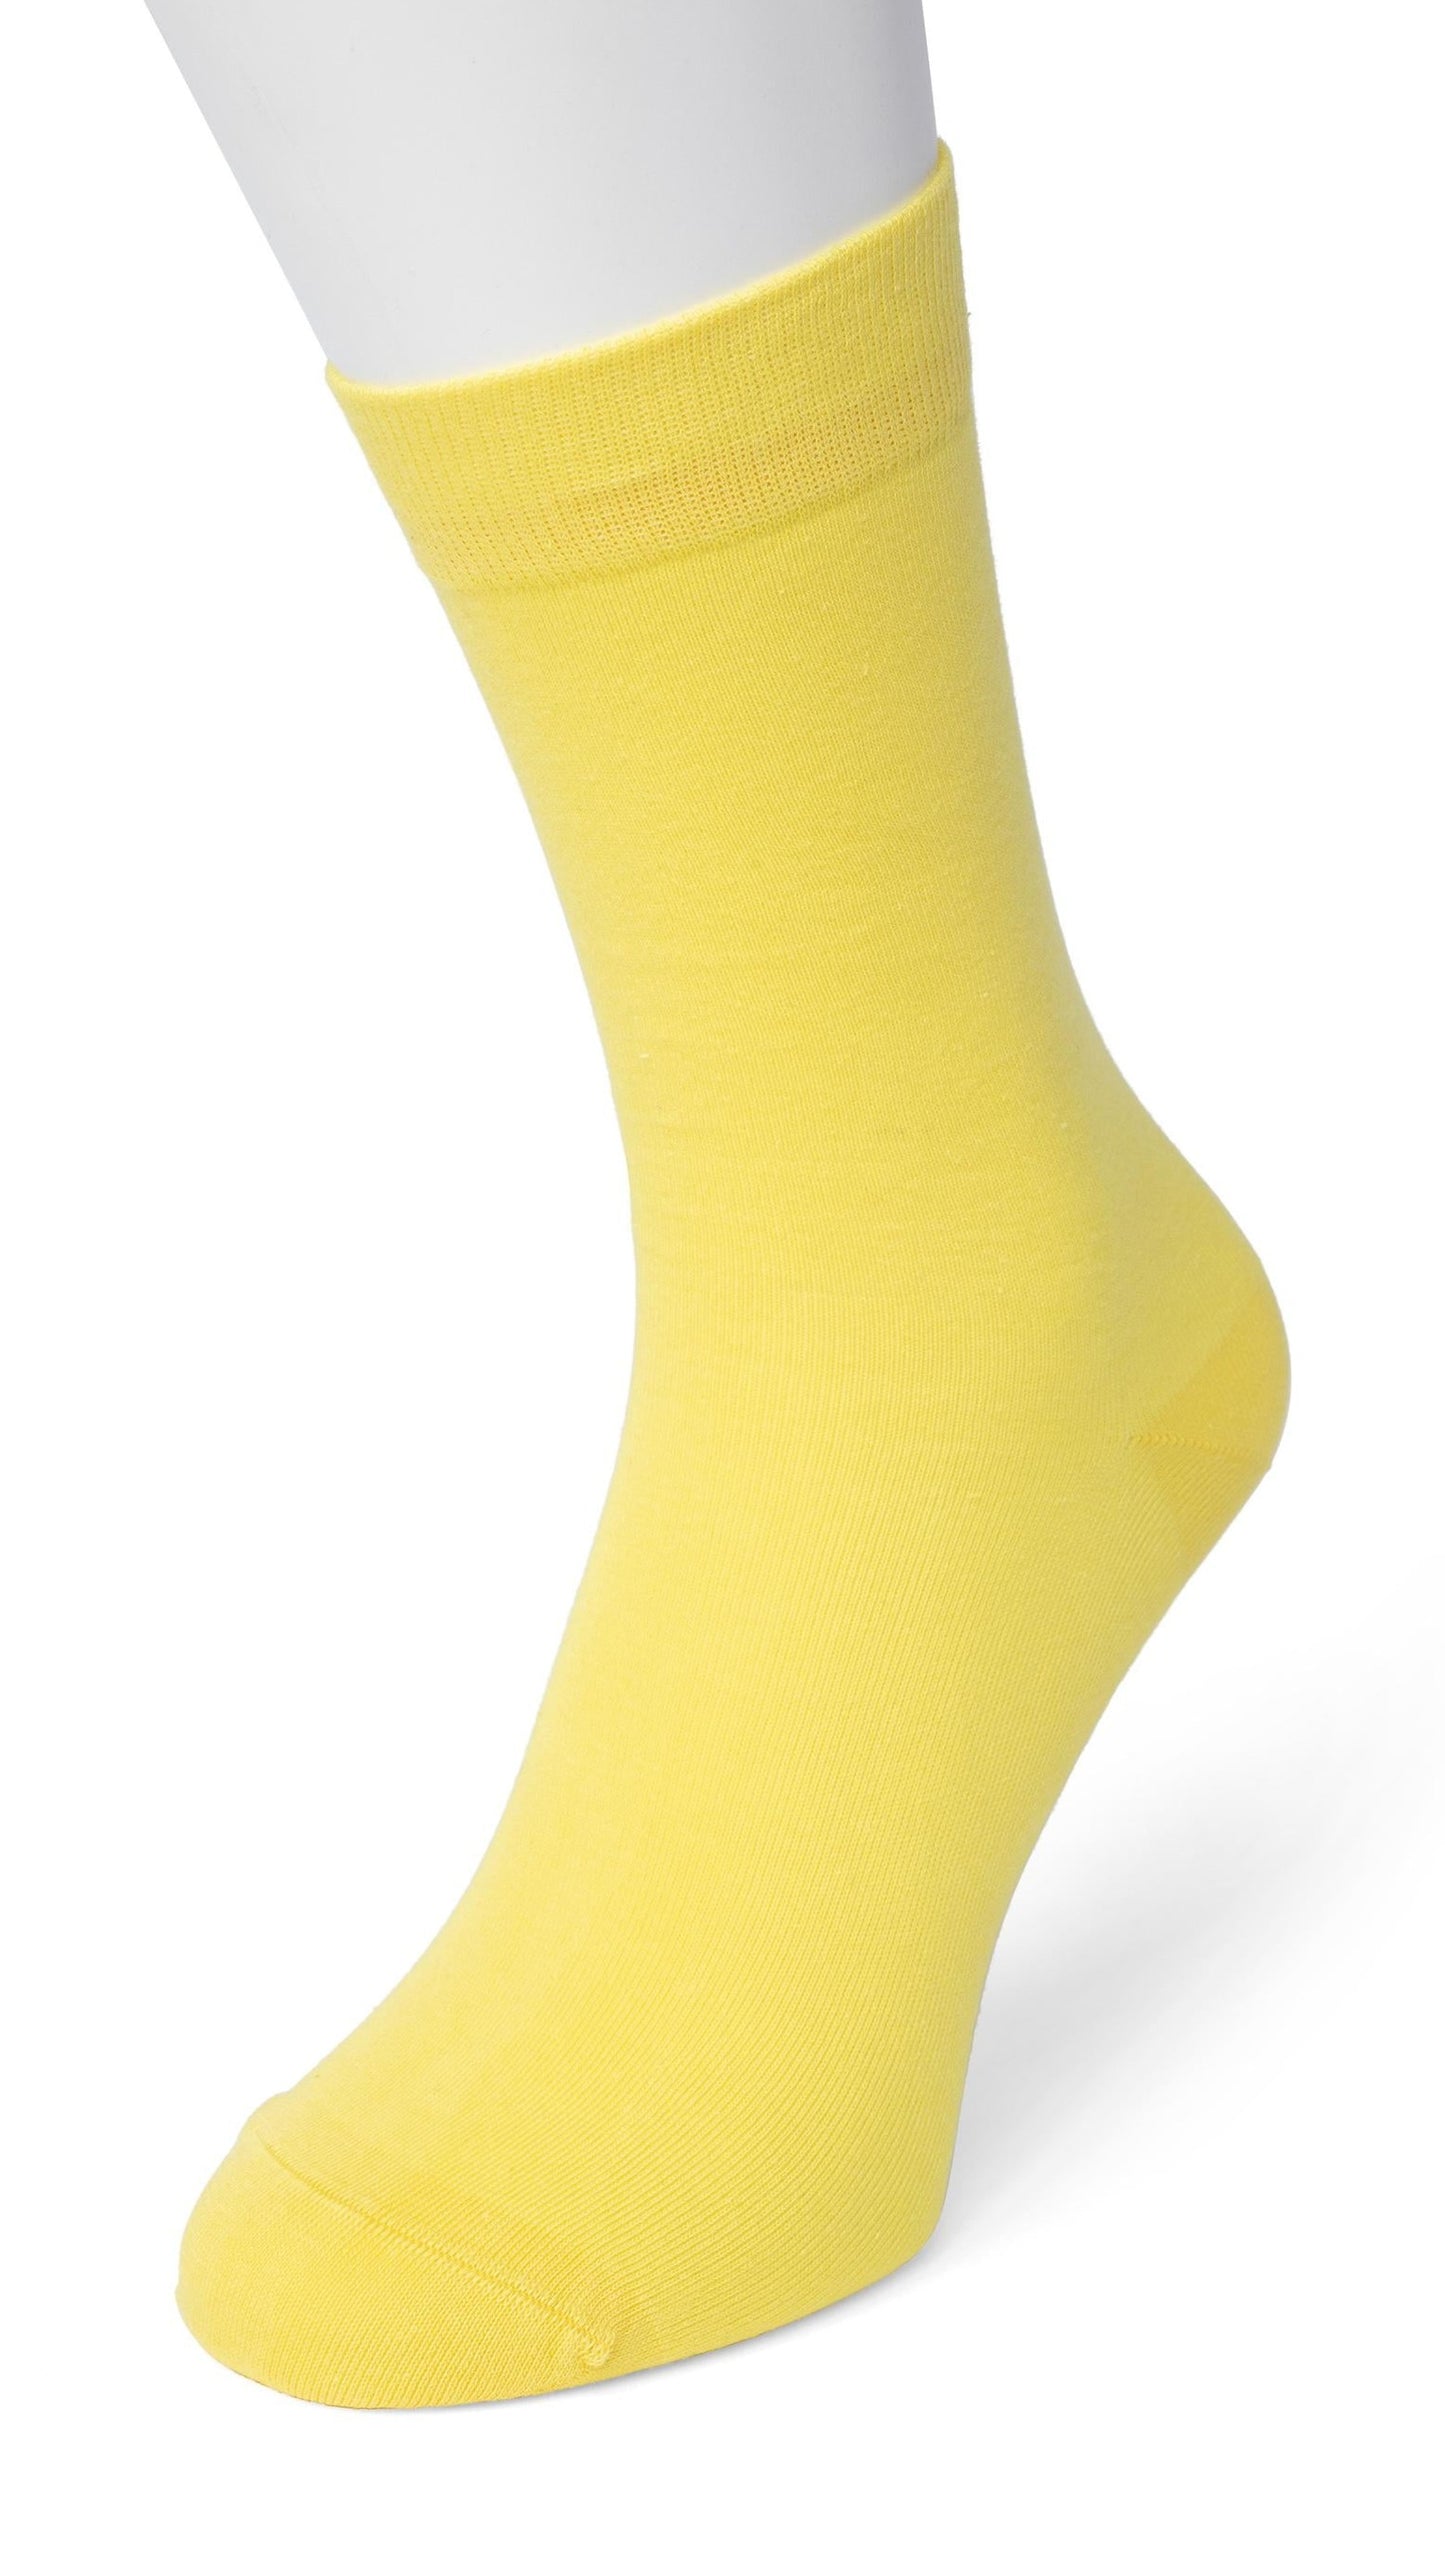 Bonnie Doon 83422 / BD632401 Cotton Sock - Lemon yellow ankle socks available in men and women sizes.